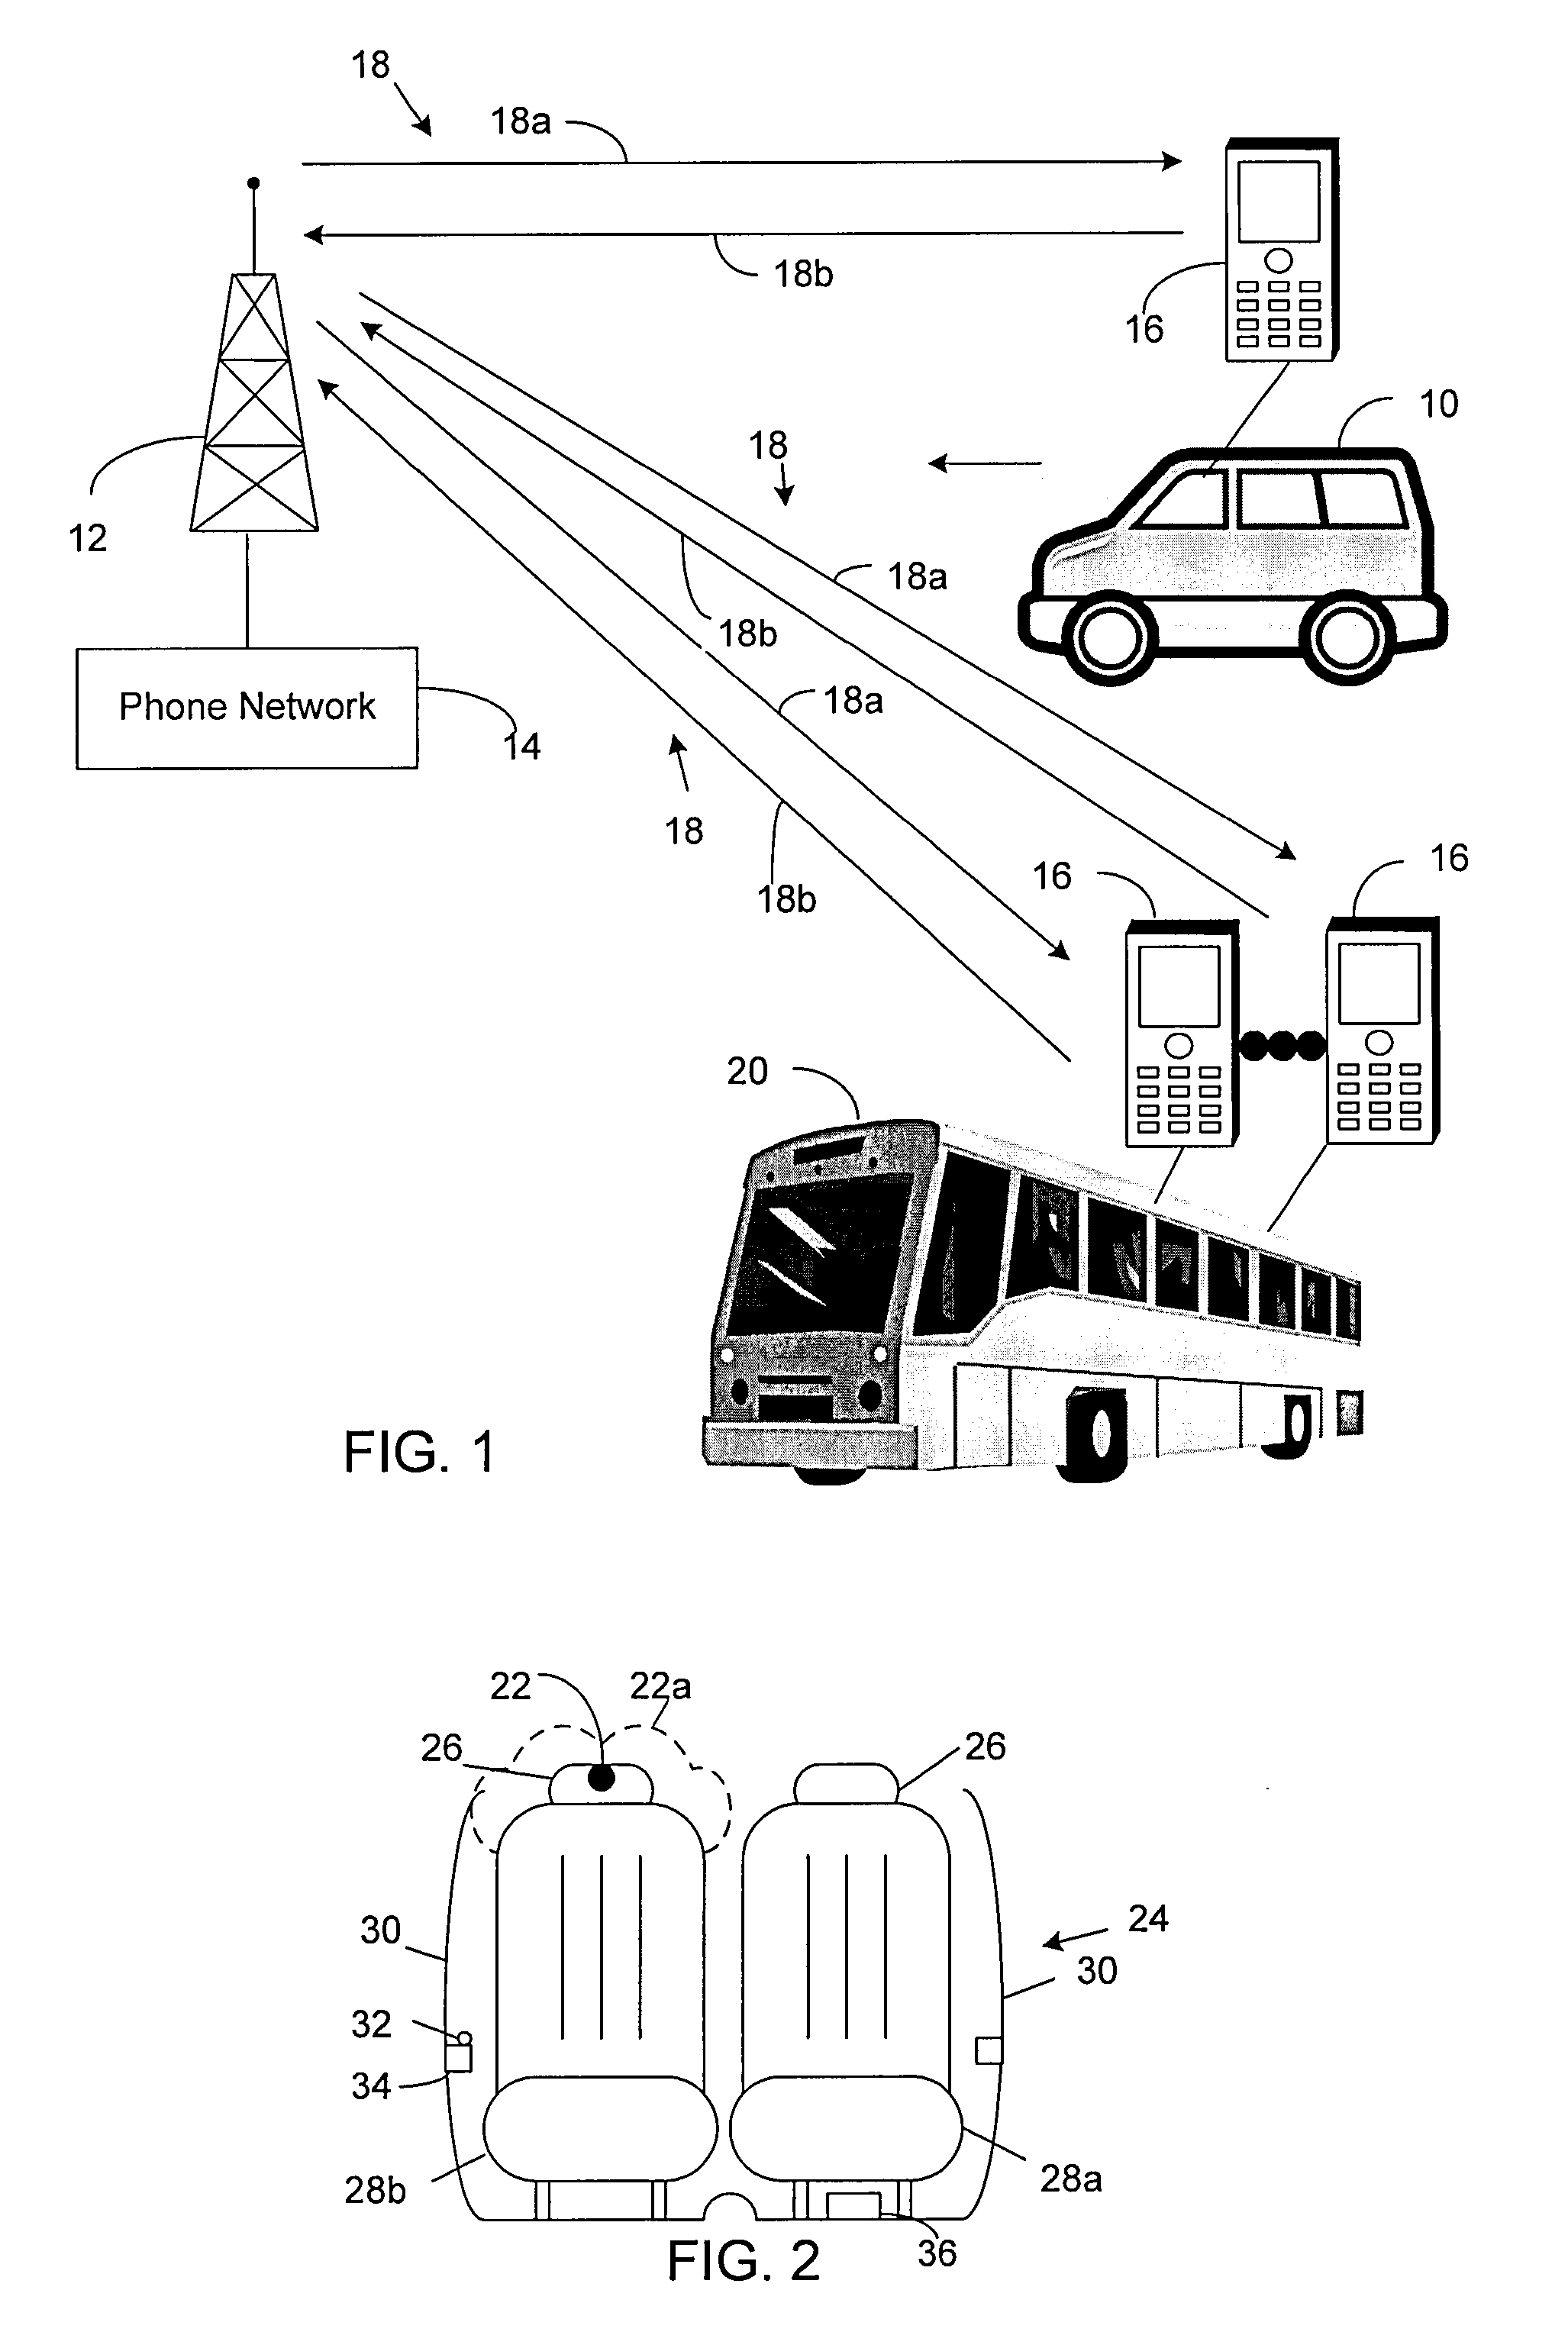 Method for safe operation of mobile phone in a car environment